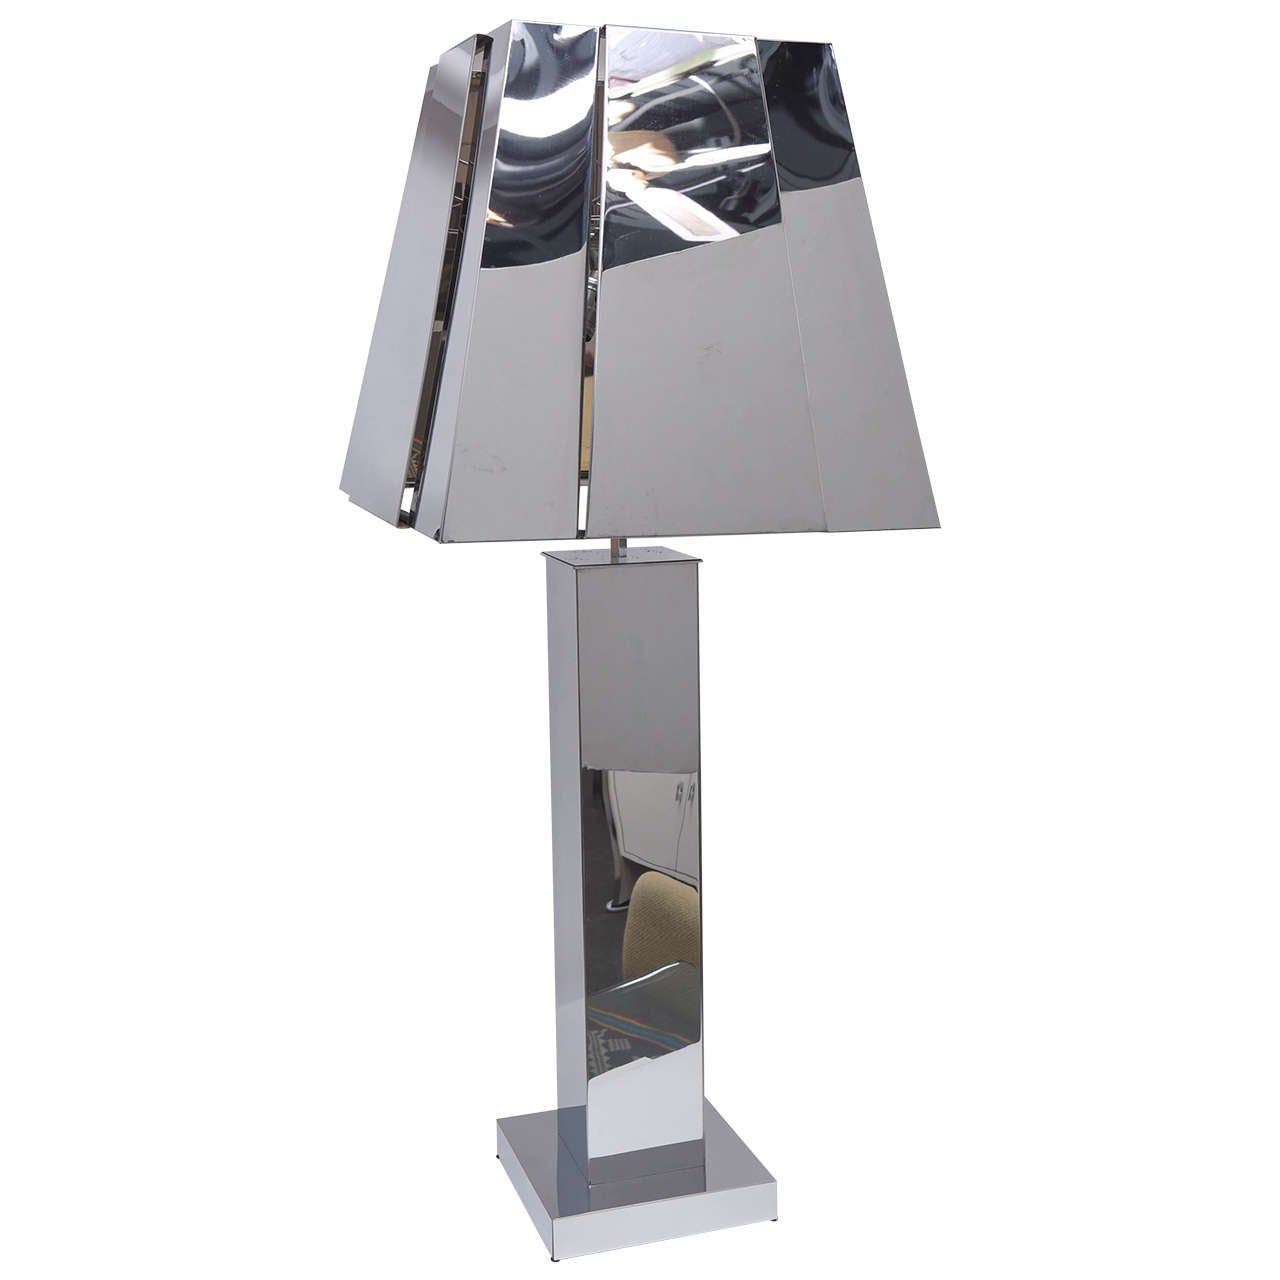 Curtis Jere Sculptural Chrome Table Lamp with Chrome Shade, USA 1976 Signed For Sale